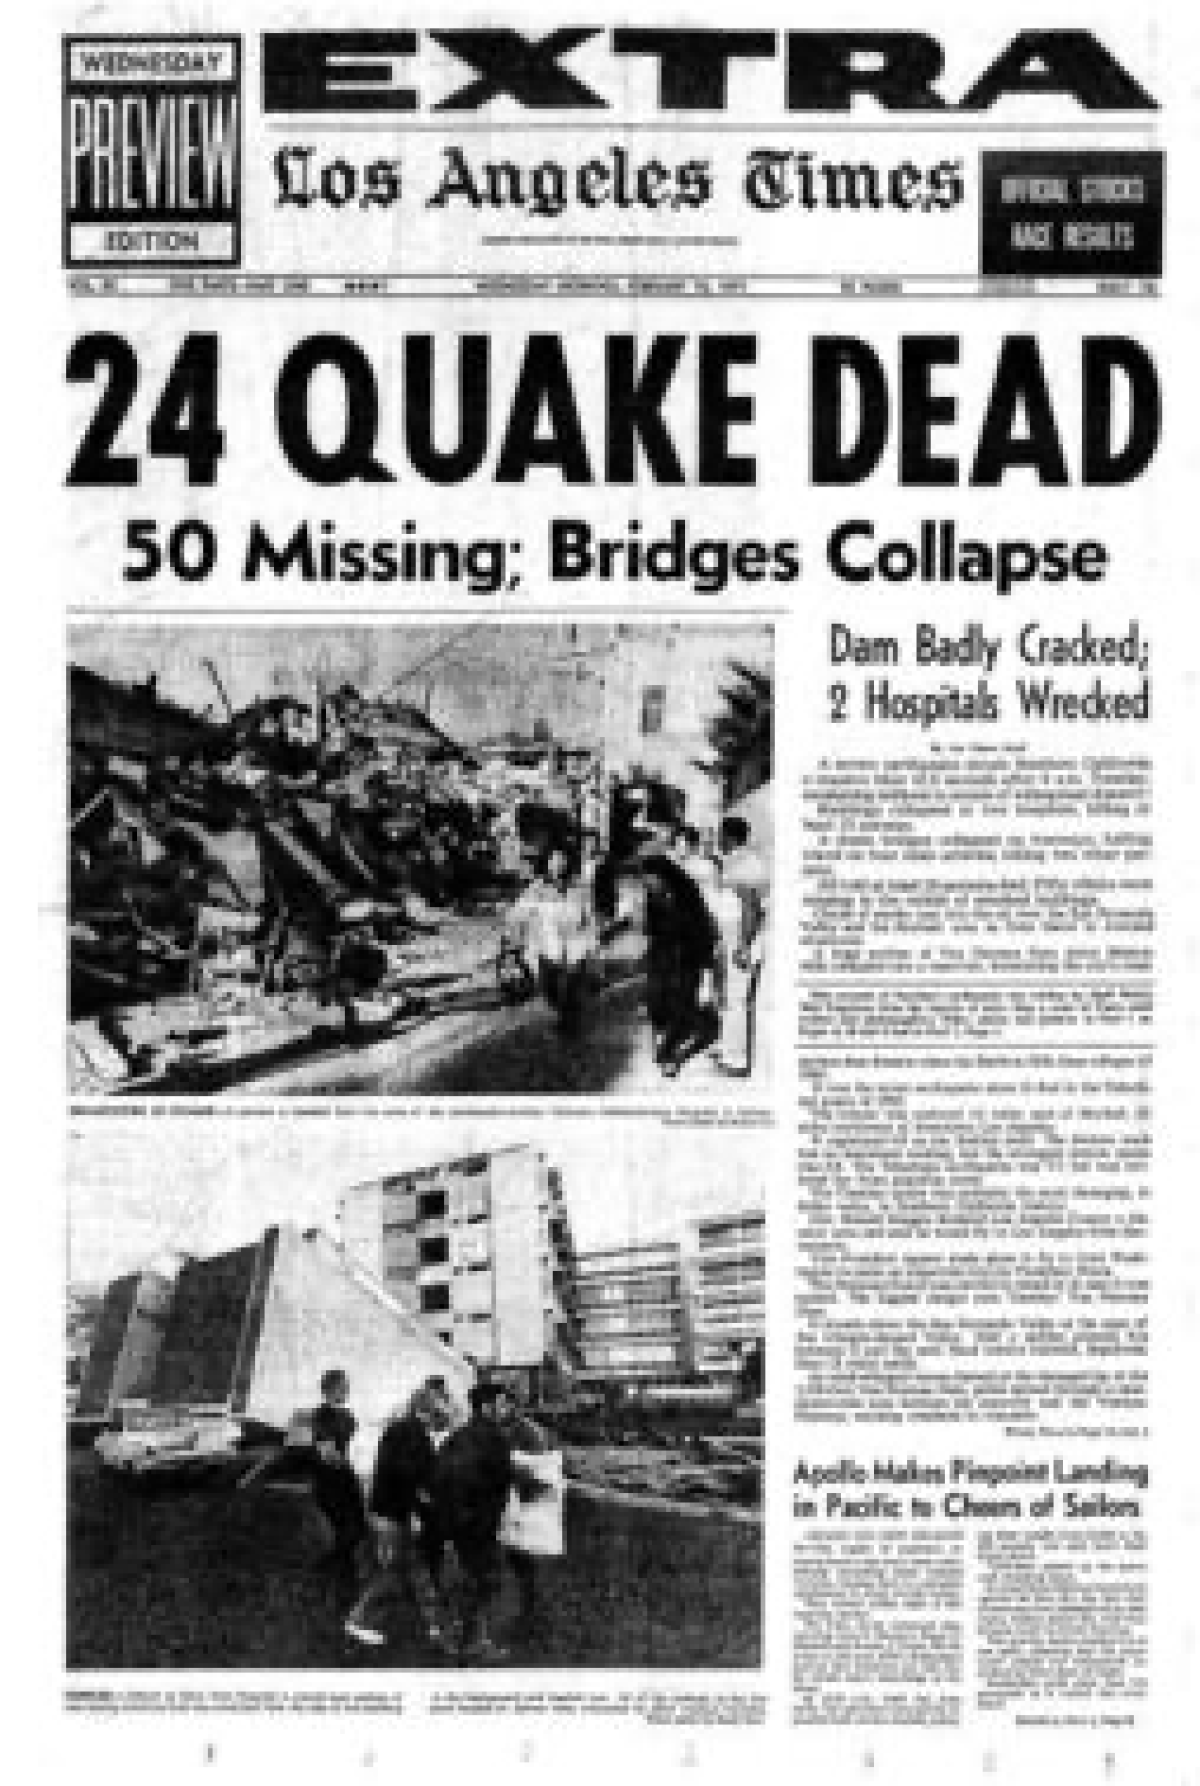 L.A. Times front page after Sylmar quake